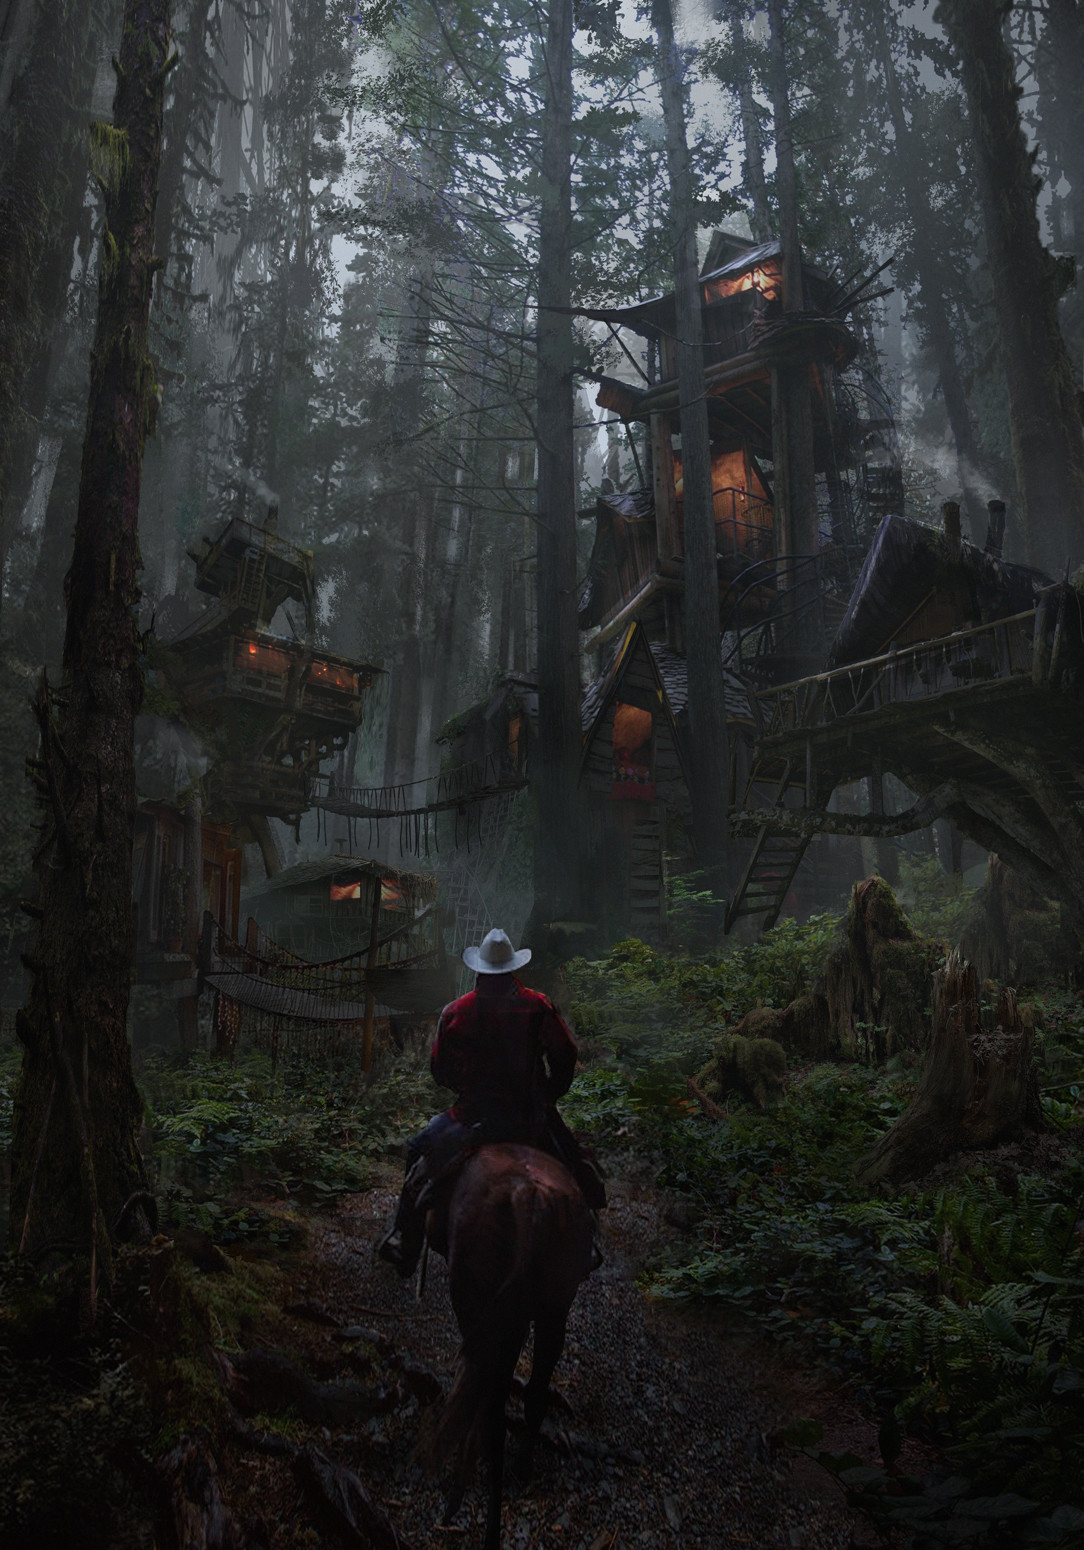 Finding in the wild forest. - Forest, House, Tree, Wanderer, Horses, Art